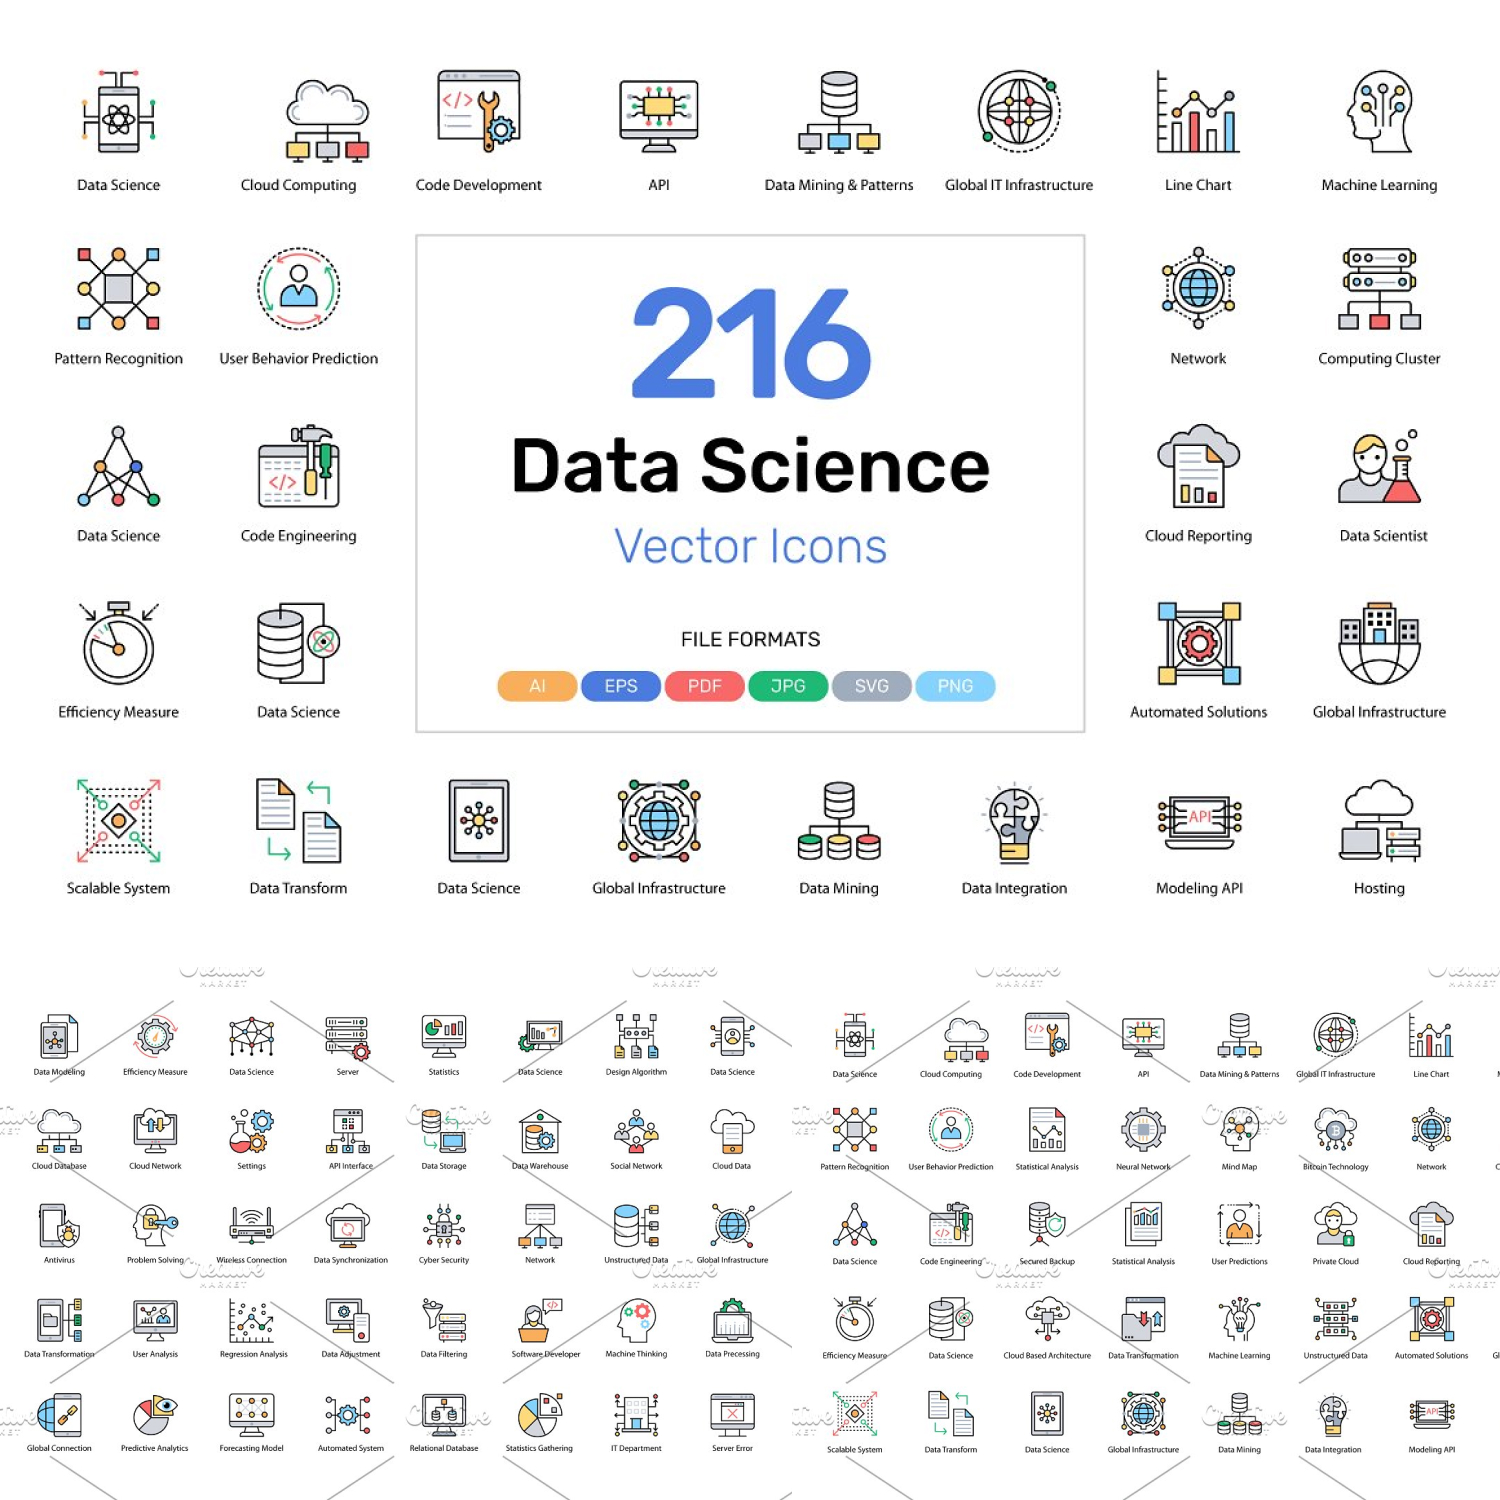 Preview data science vector icons.